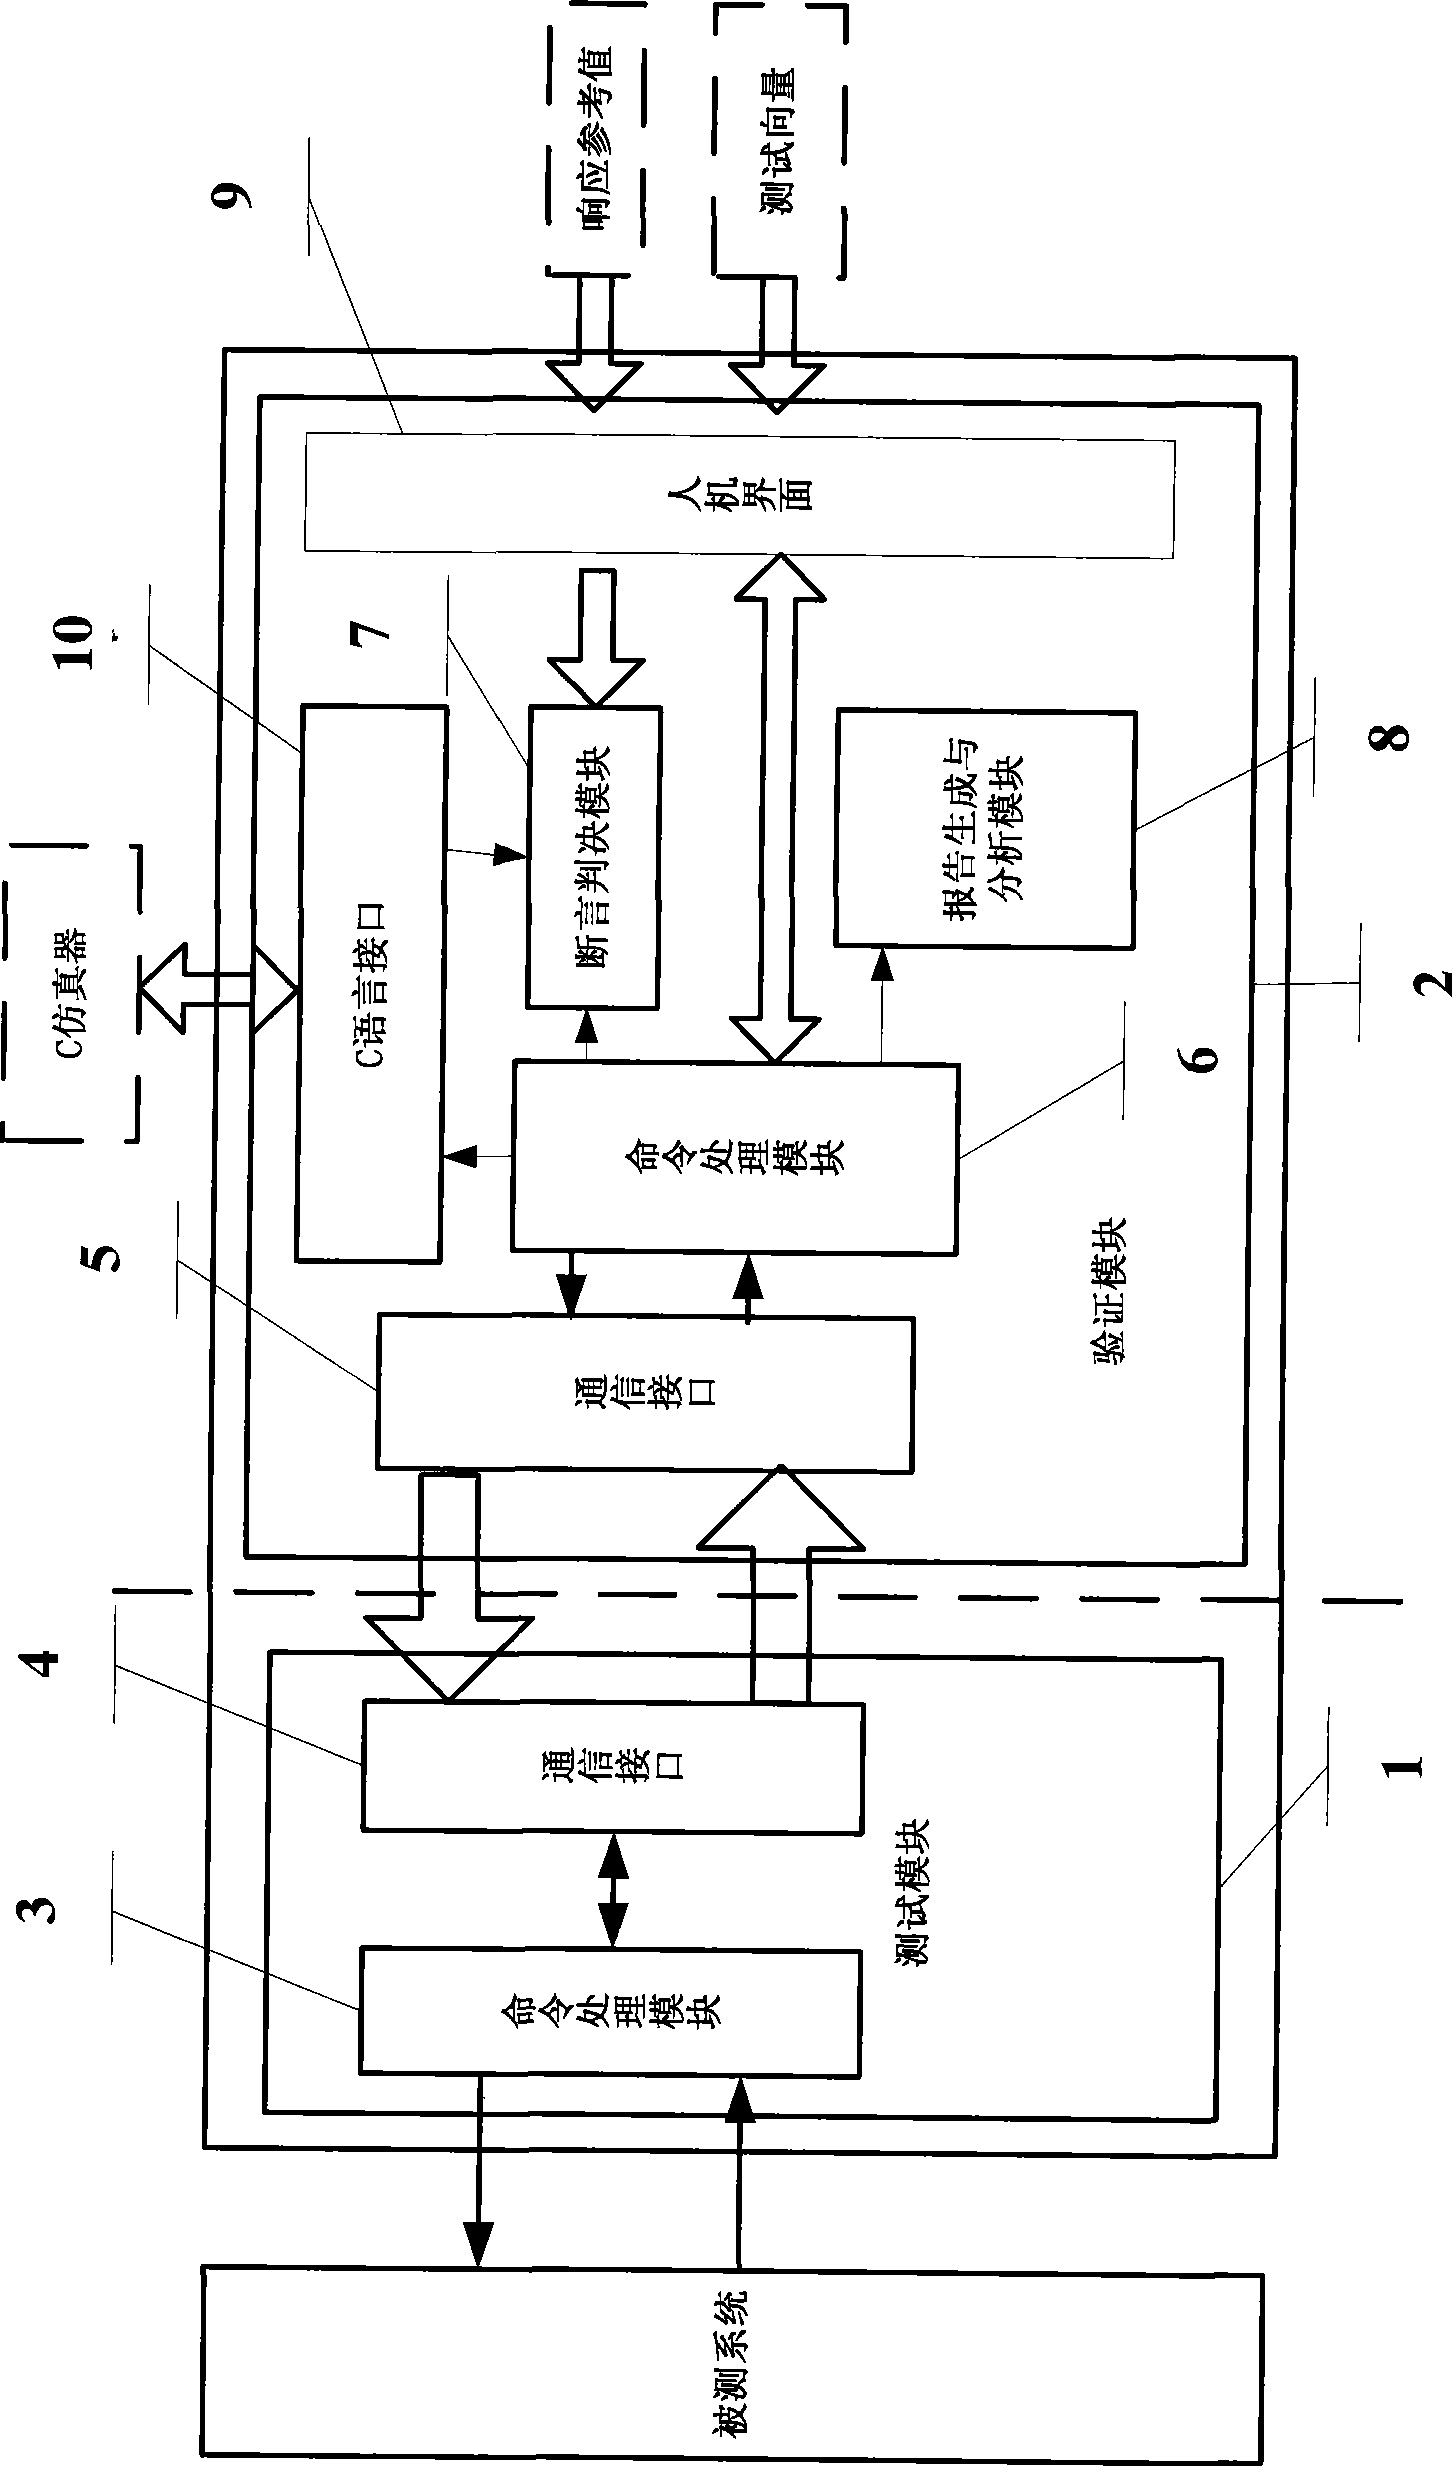 Real-time simulation validation system and method for communication system integrated circuit design